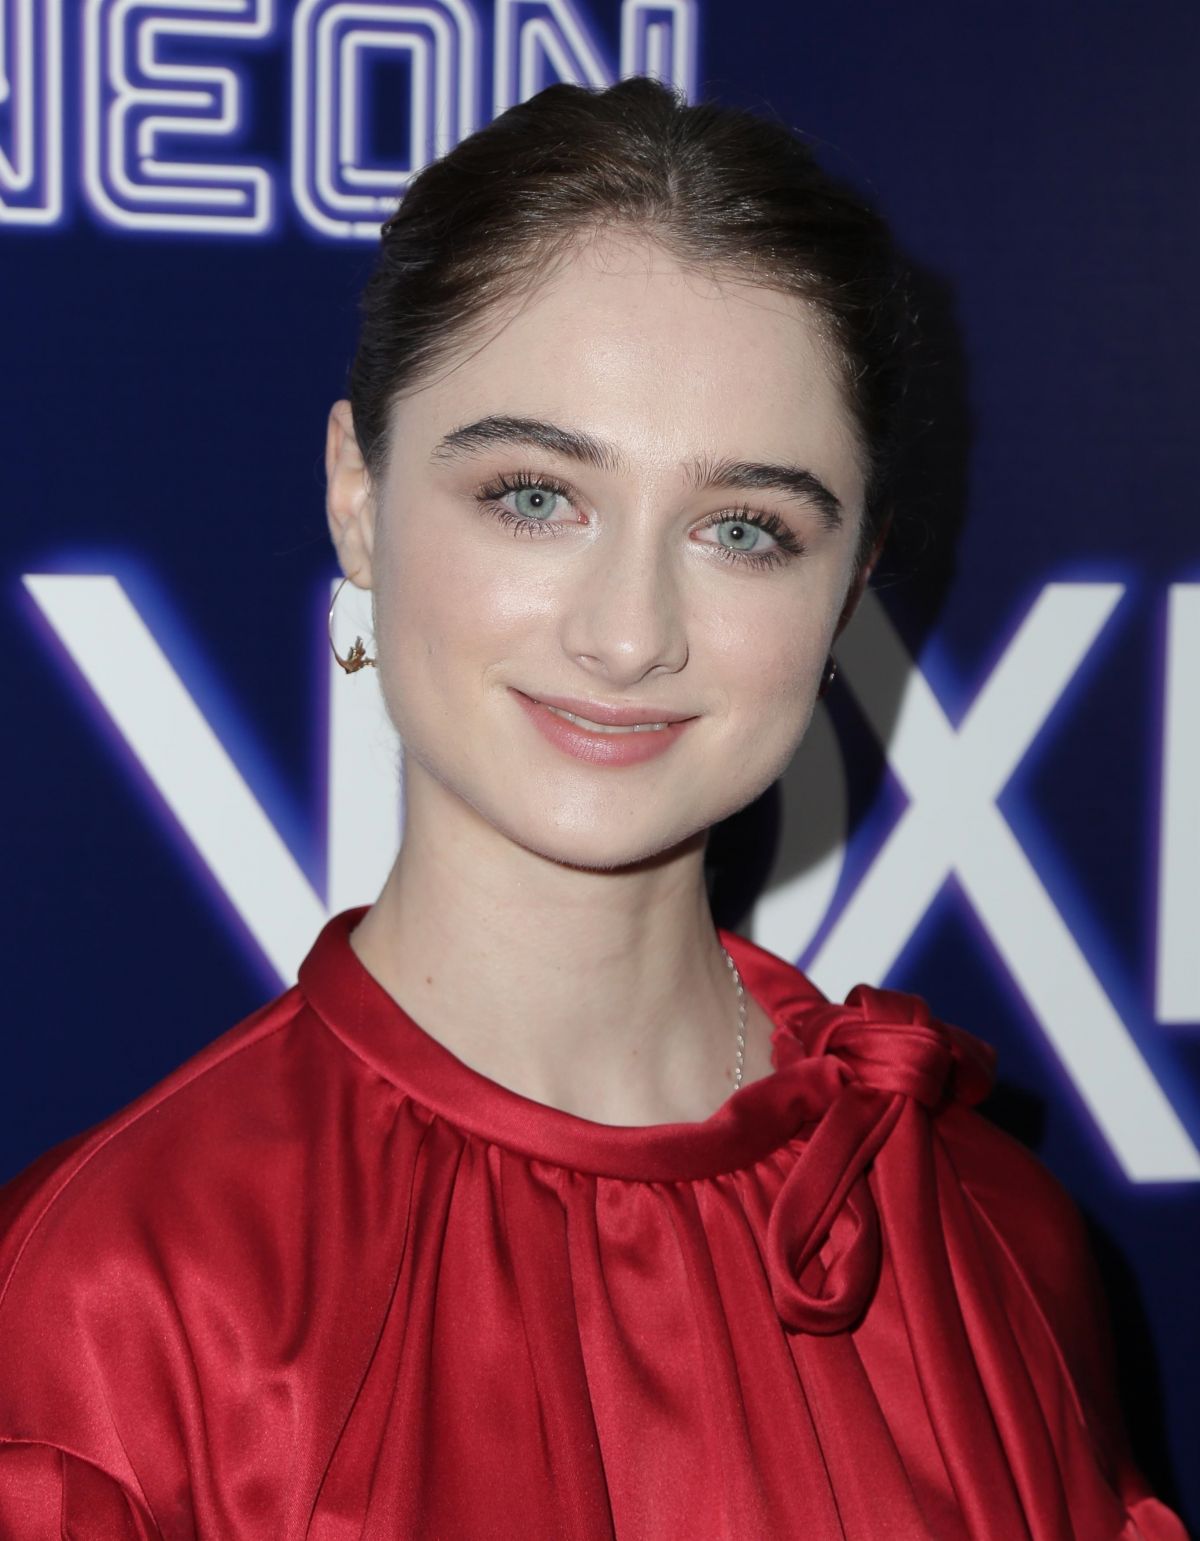 RAFFEY CASSIDY at Vox Lux Premiere in Hollywood 12/05/2018. 